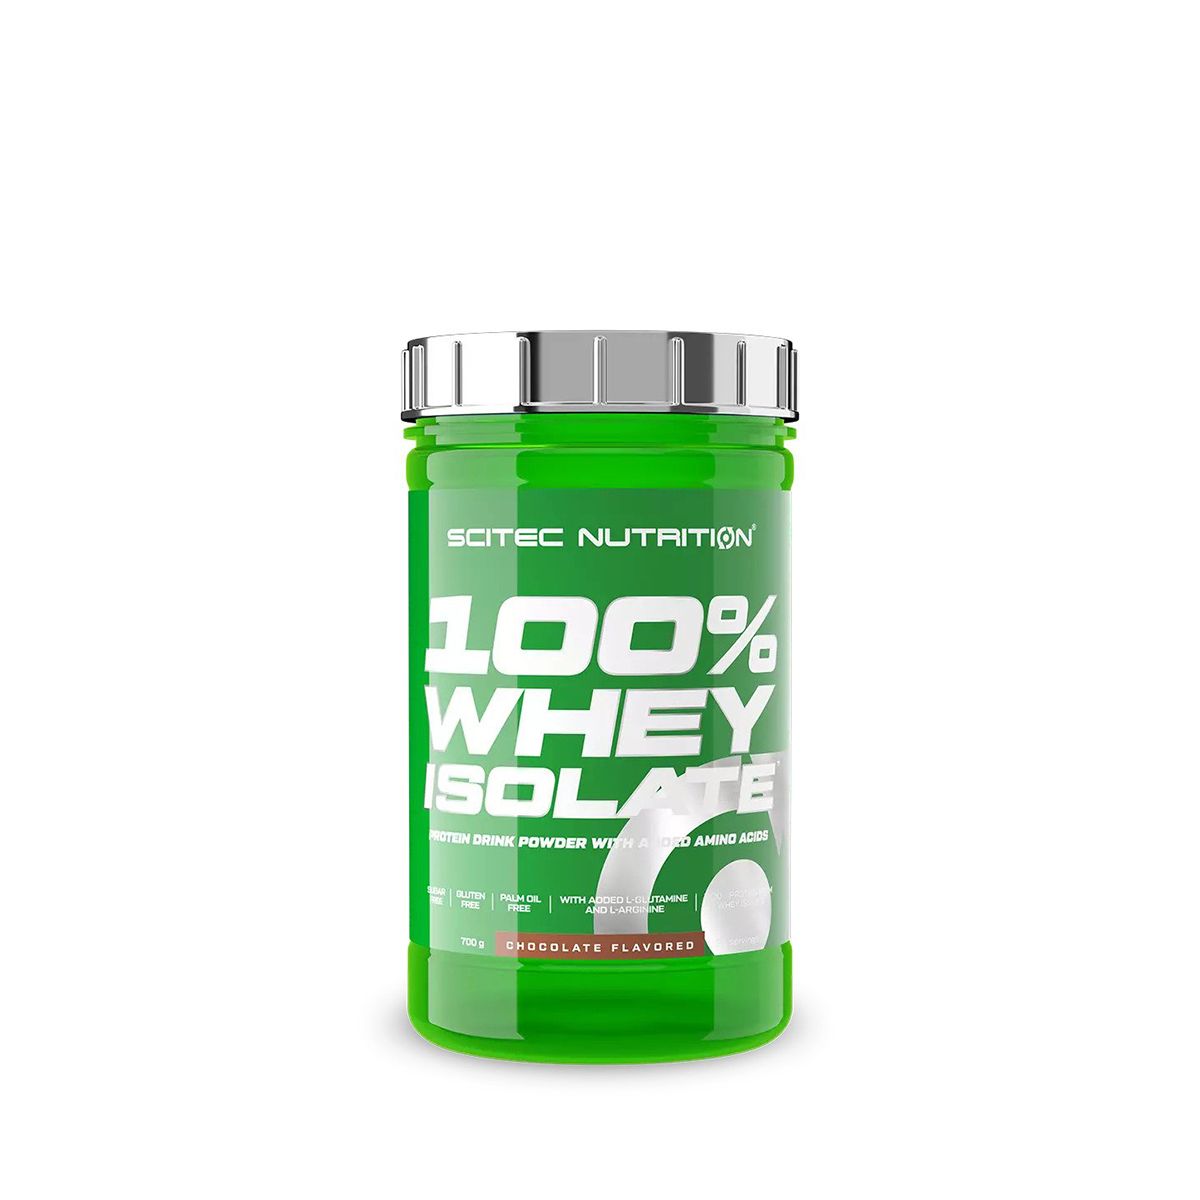 SCITEC NUTRITION - 100% WHEY ISOLATE - 700 G